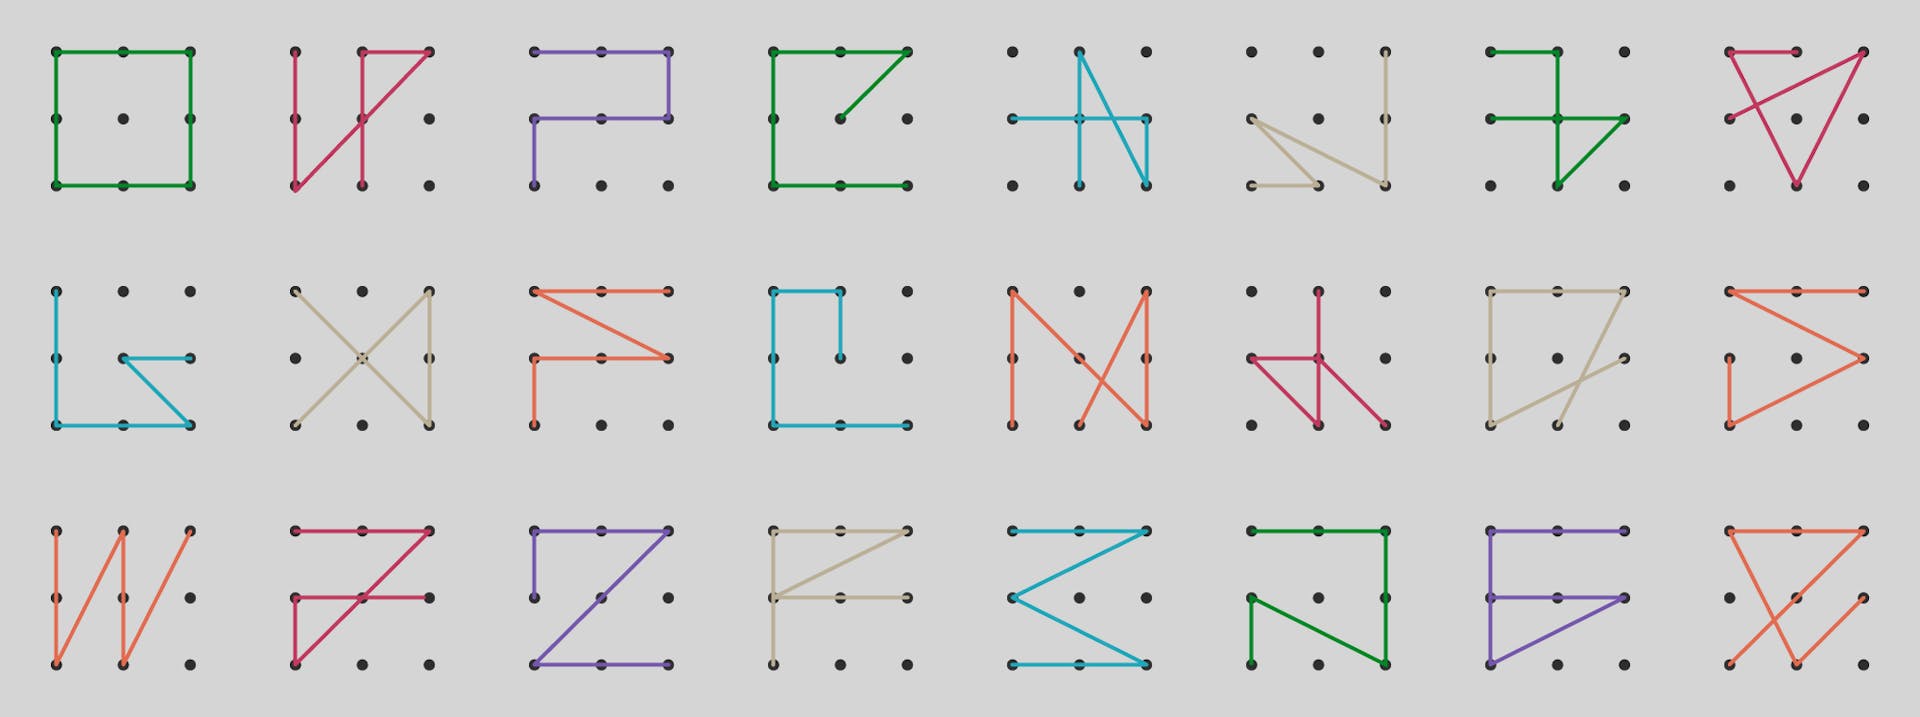 Illustration of a grid with symbols drawn in colourful lines between the dots